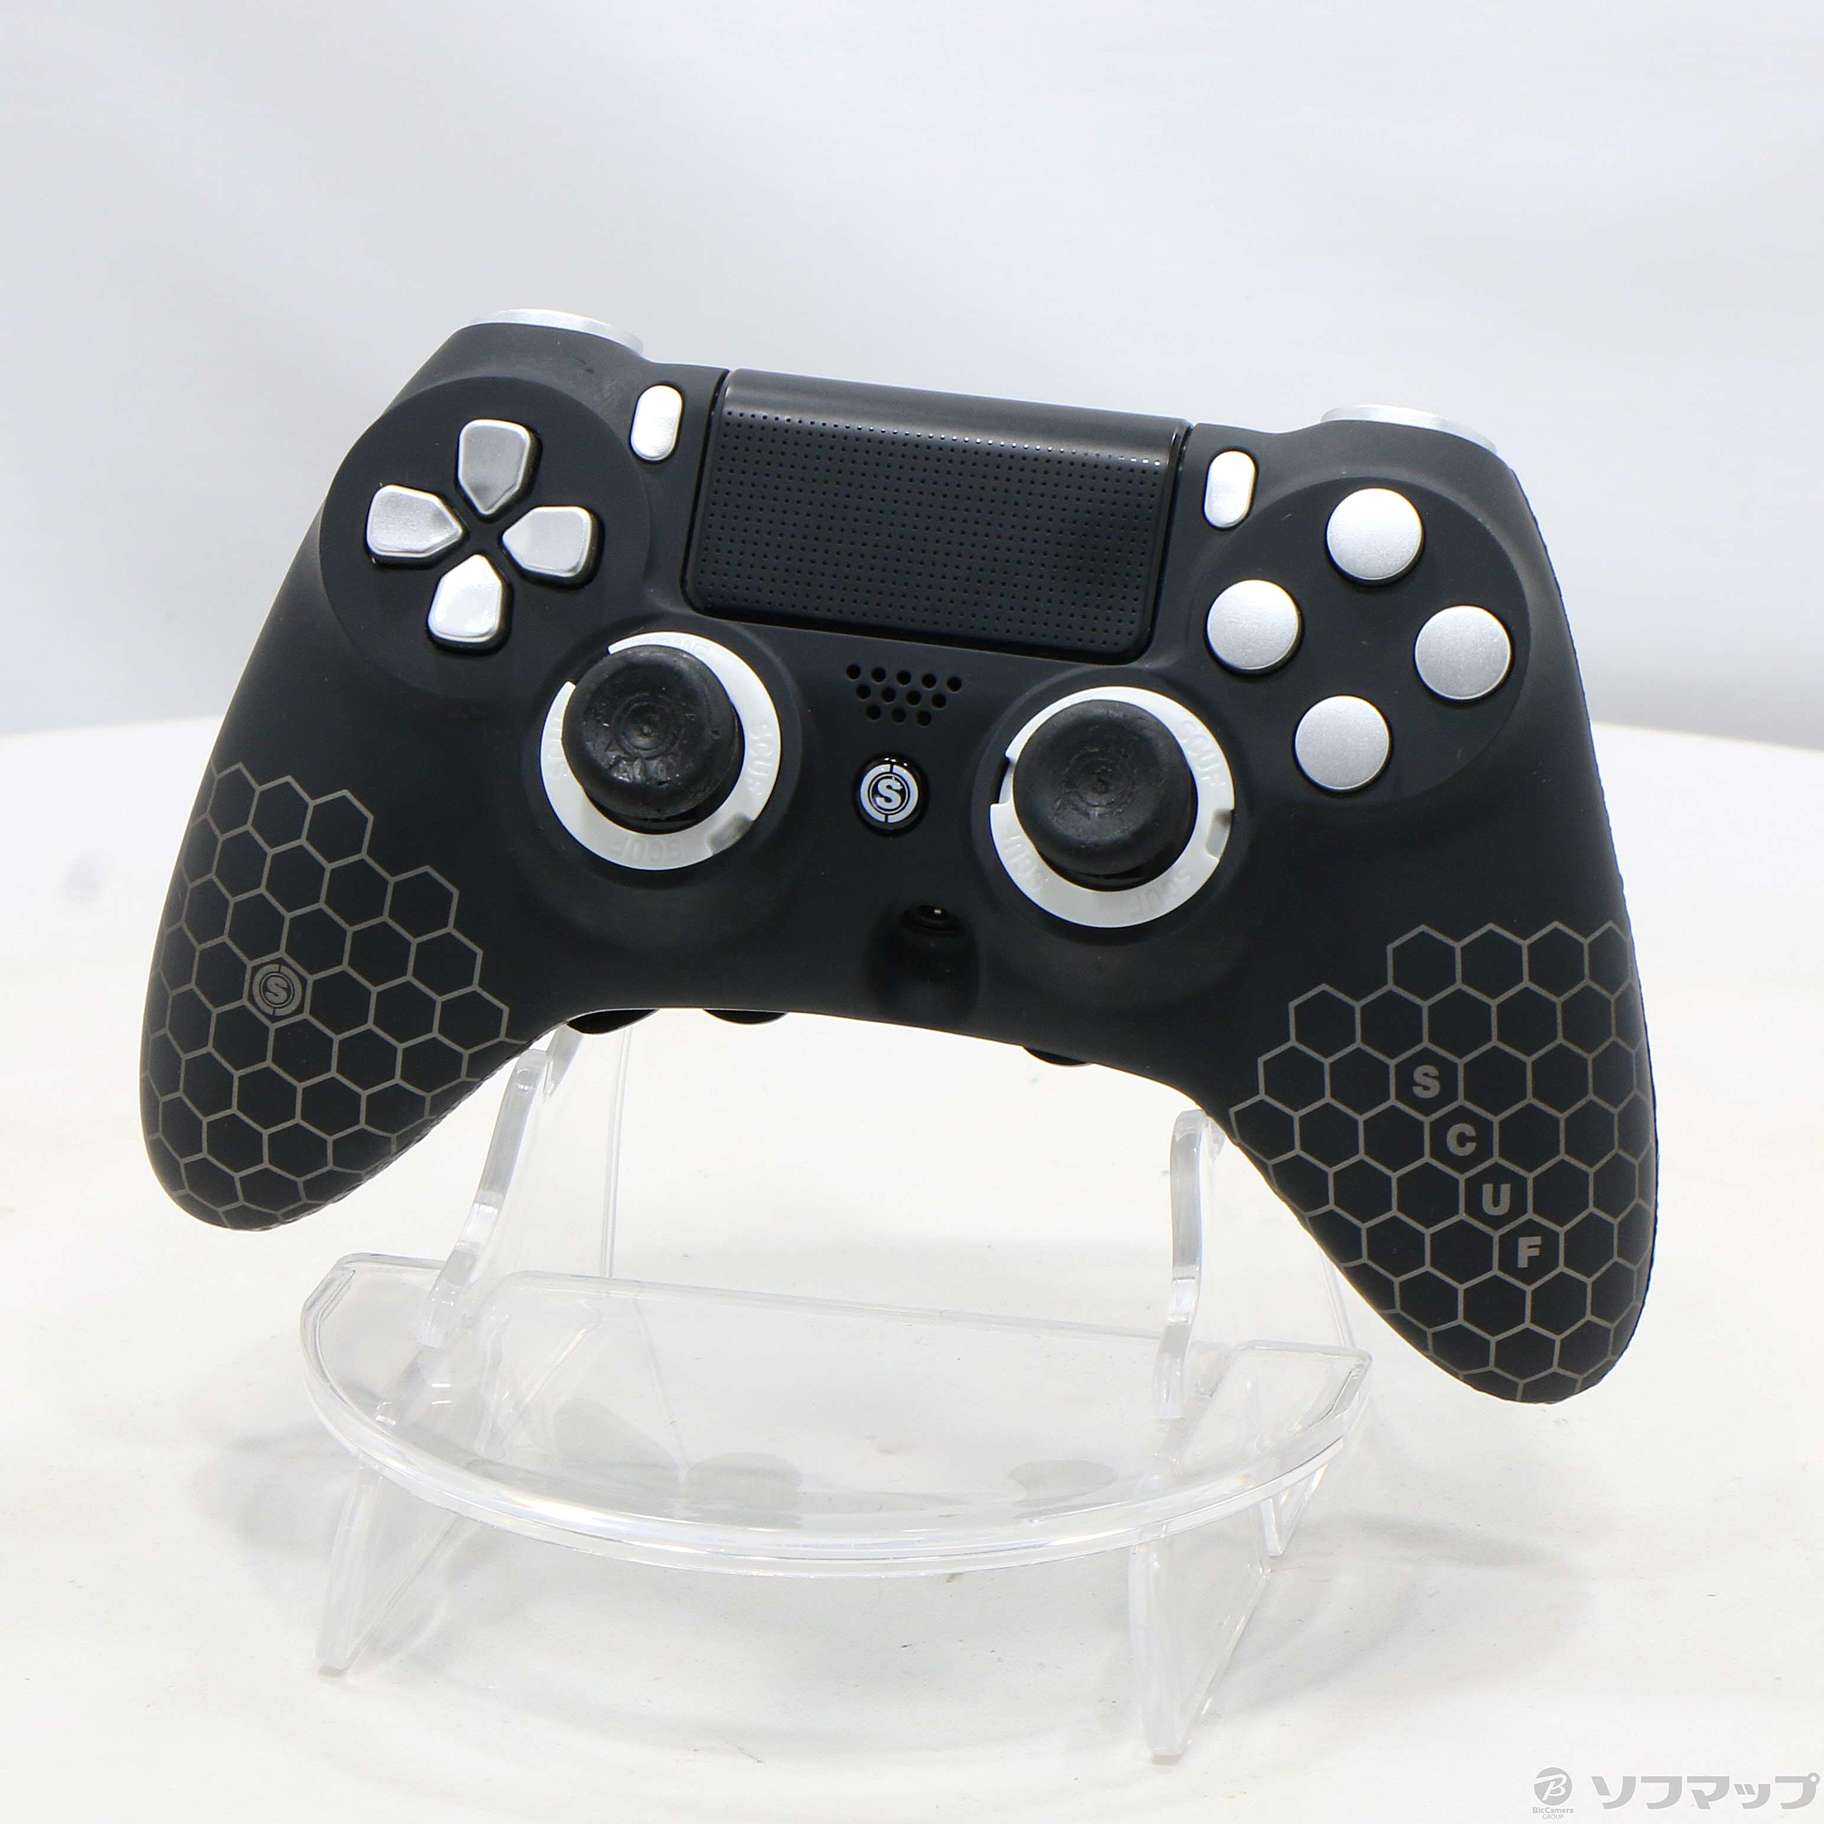 scufコントローラー　新古品　付け替えあり　ps4